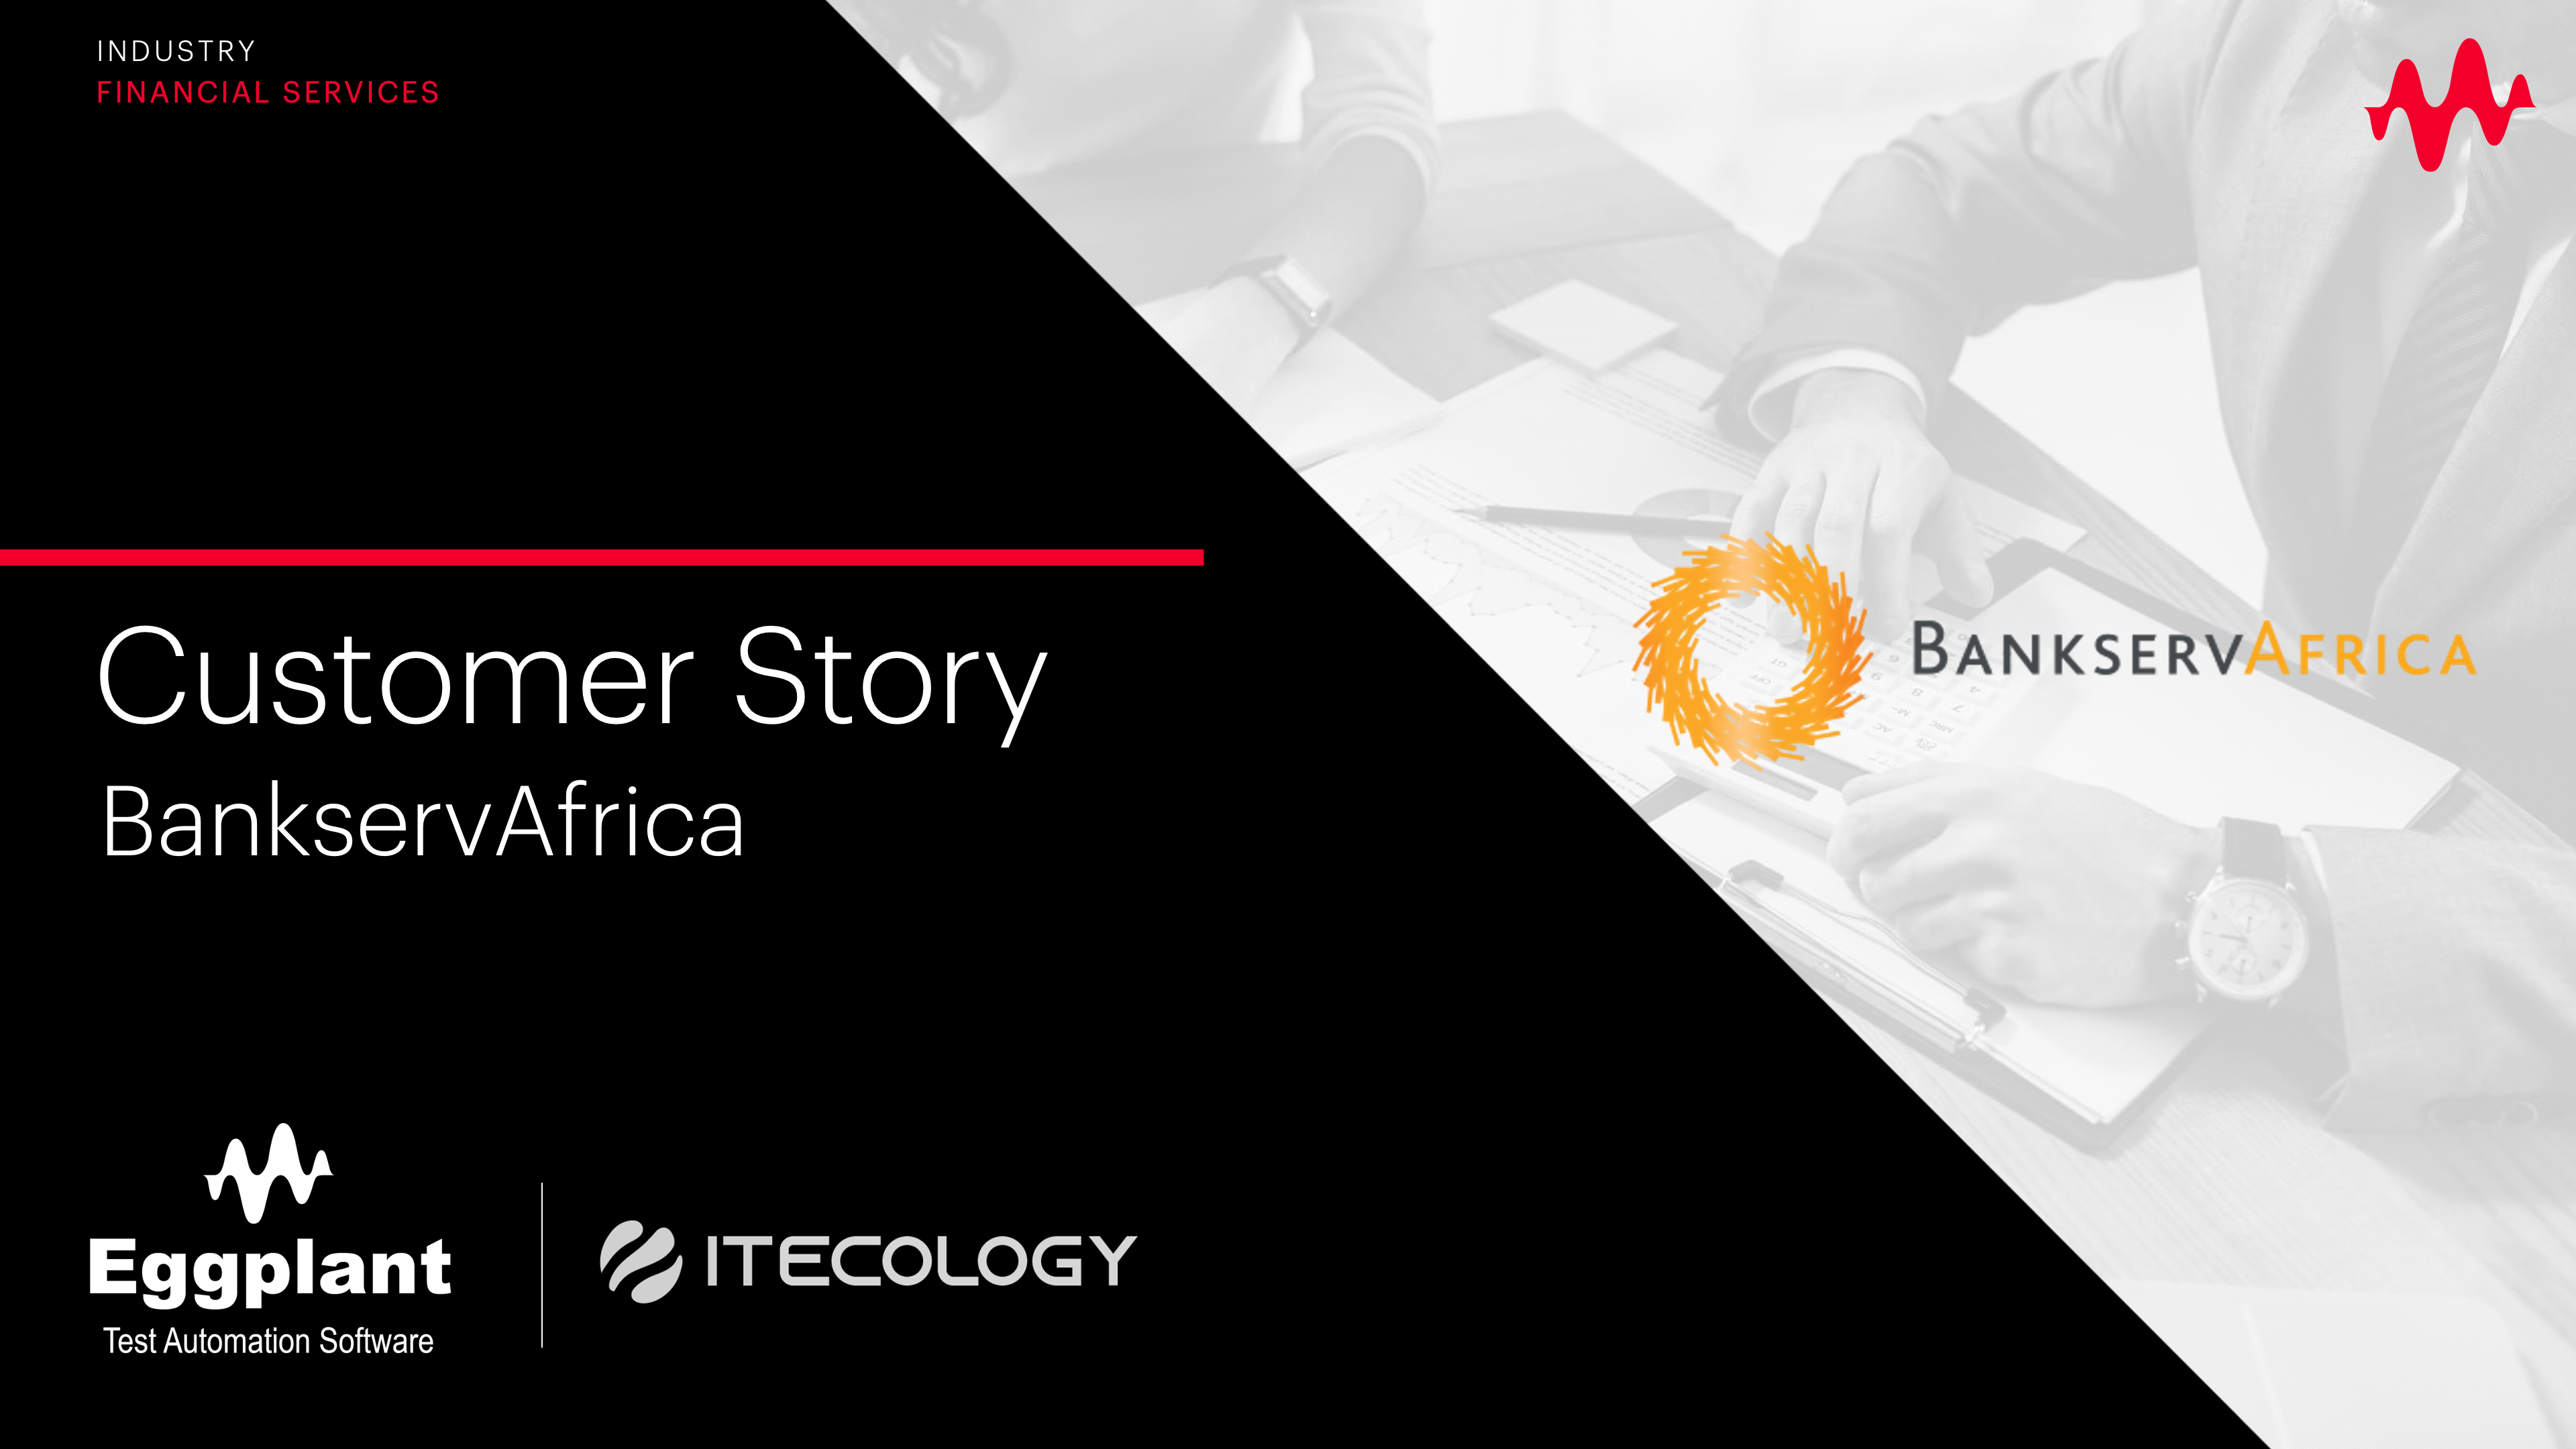 BankservAfrica Improves Testing Efficiency With Eggplant Test Automation